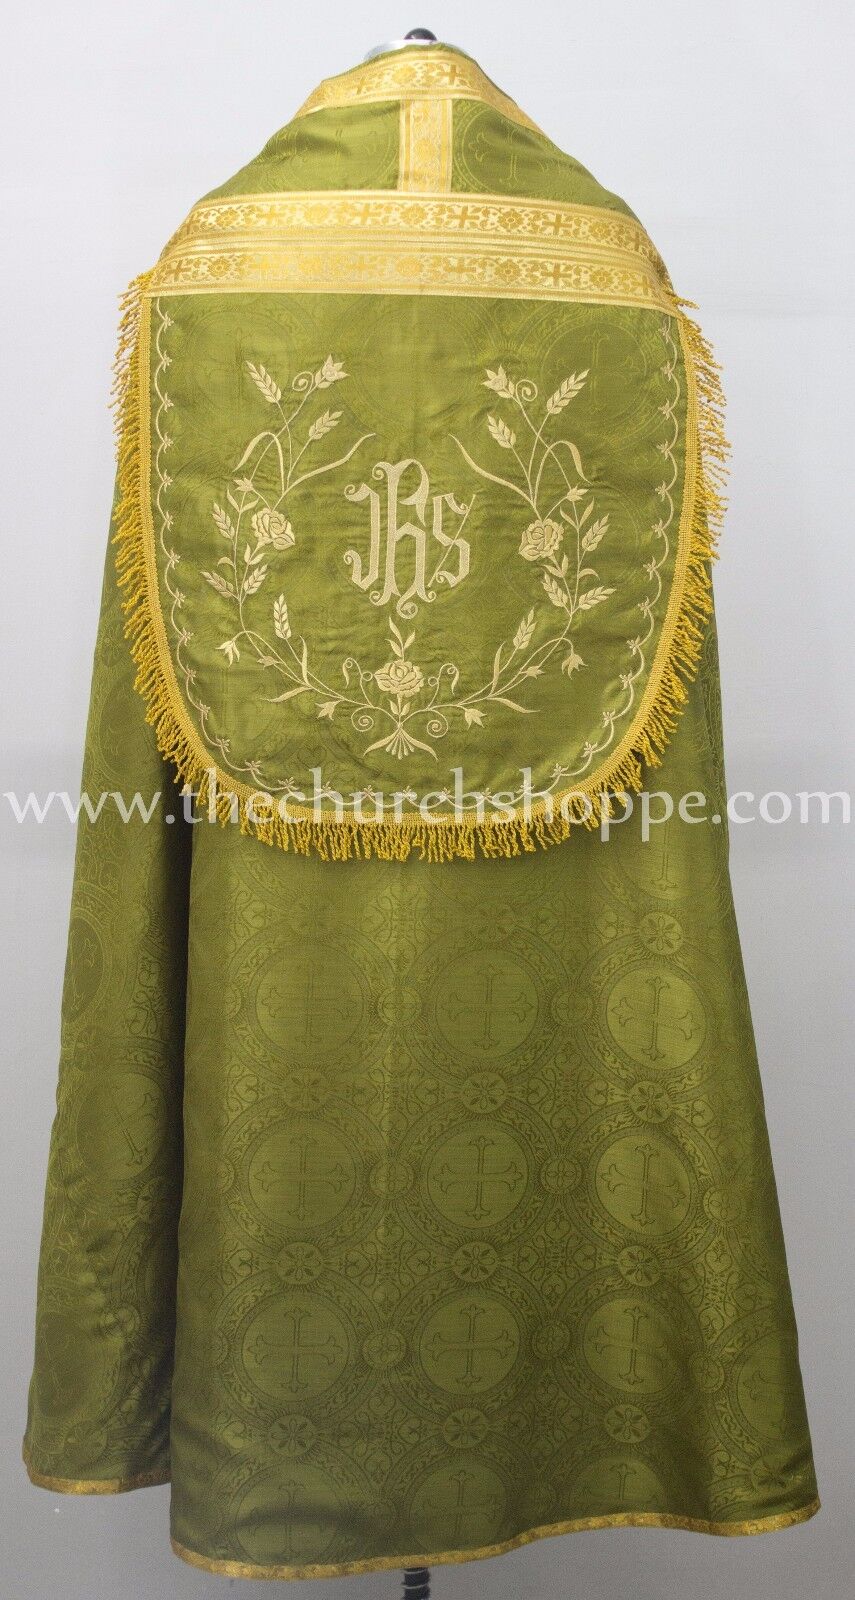 New Olive Green Cope & Stole Set wt IHS embroidery,capa pluvial,chape,far fronte